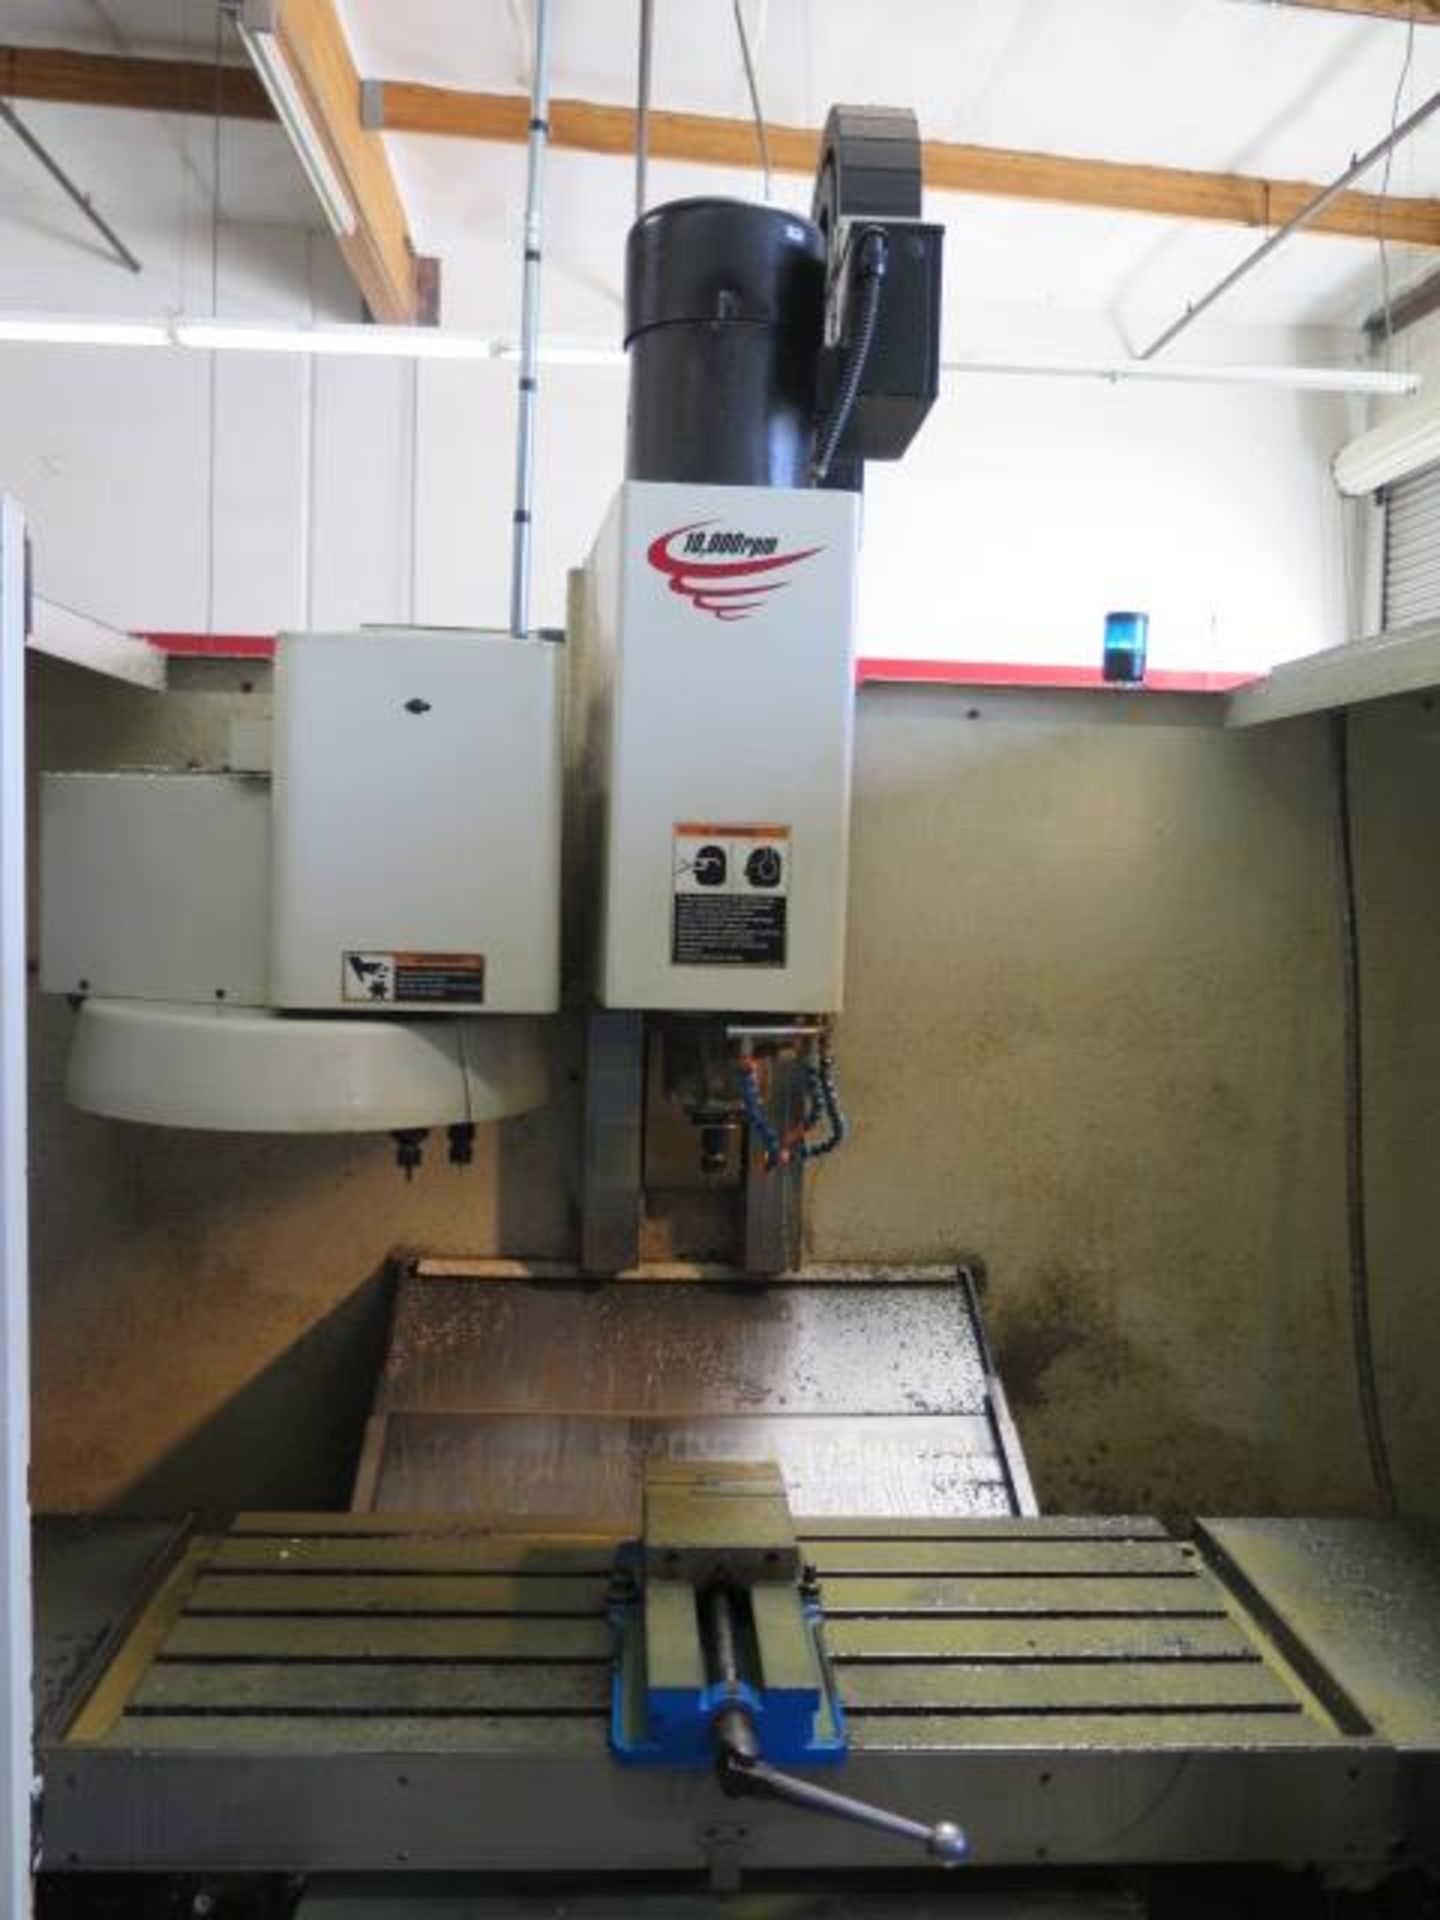 2005 Fadal VMC 4020HT CNC VMC s/n 032005067867 w/ Fadal CNC88HS Controls, SOLD AS IS - Image 4 of 13